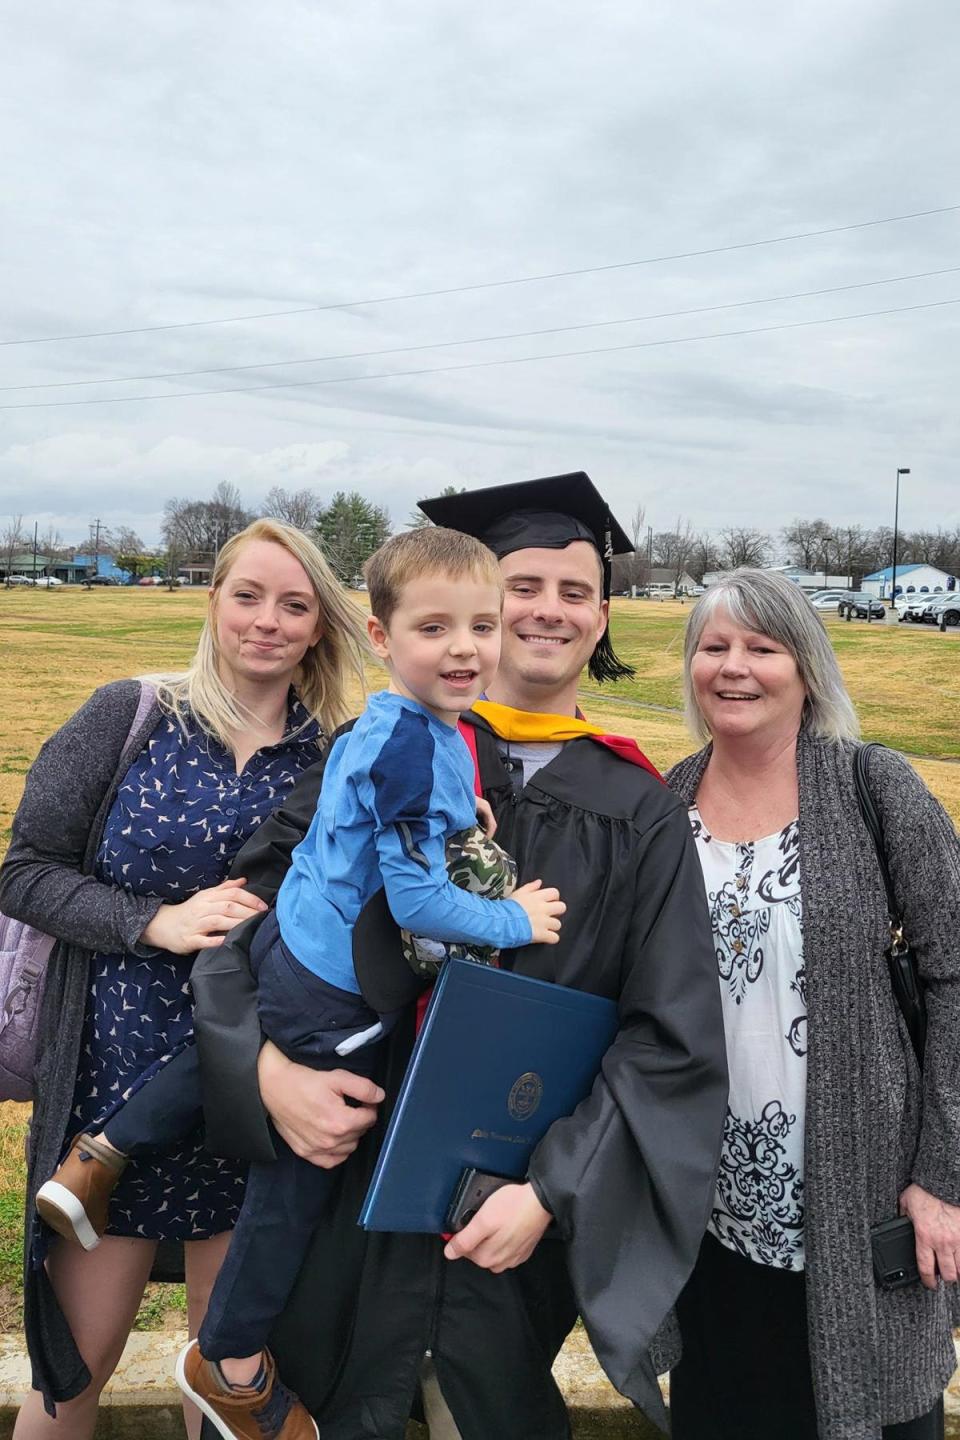 Travis Houser, recent graduate of Middle Tennessee State University's Aeronautical Science master's program, center right, celebrates his graduation with his family in December 2021 on campus. Standing, from left, are his wife, Amber Houser, his son, Nikola Houser, Houser and his mother, Janine McBee.